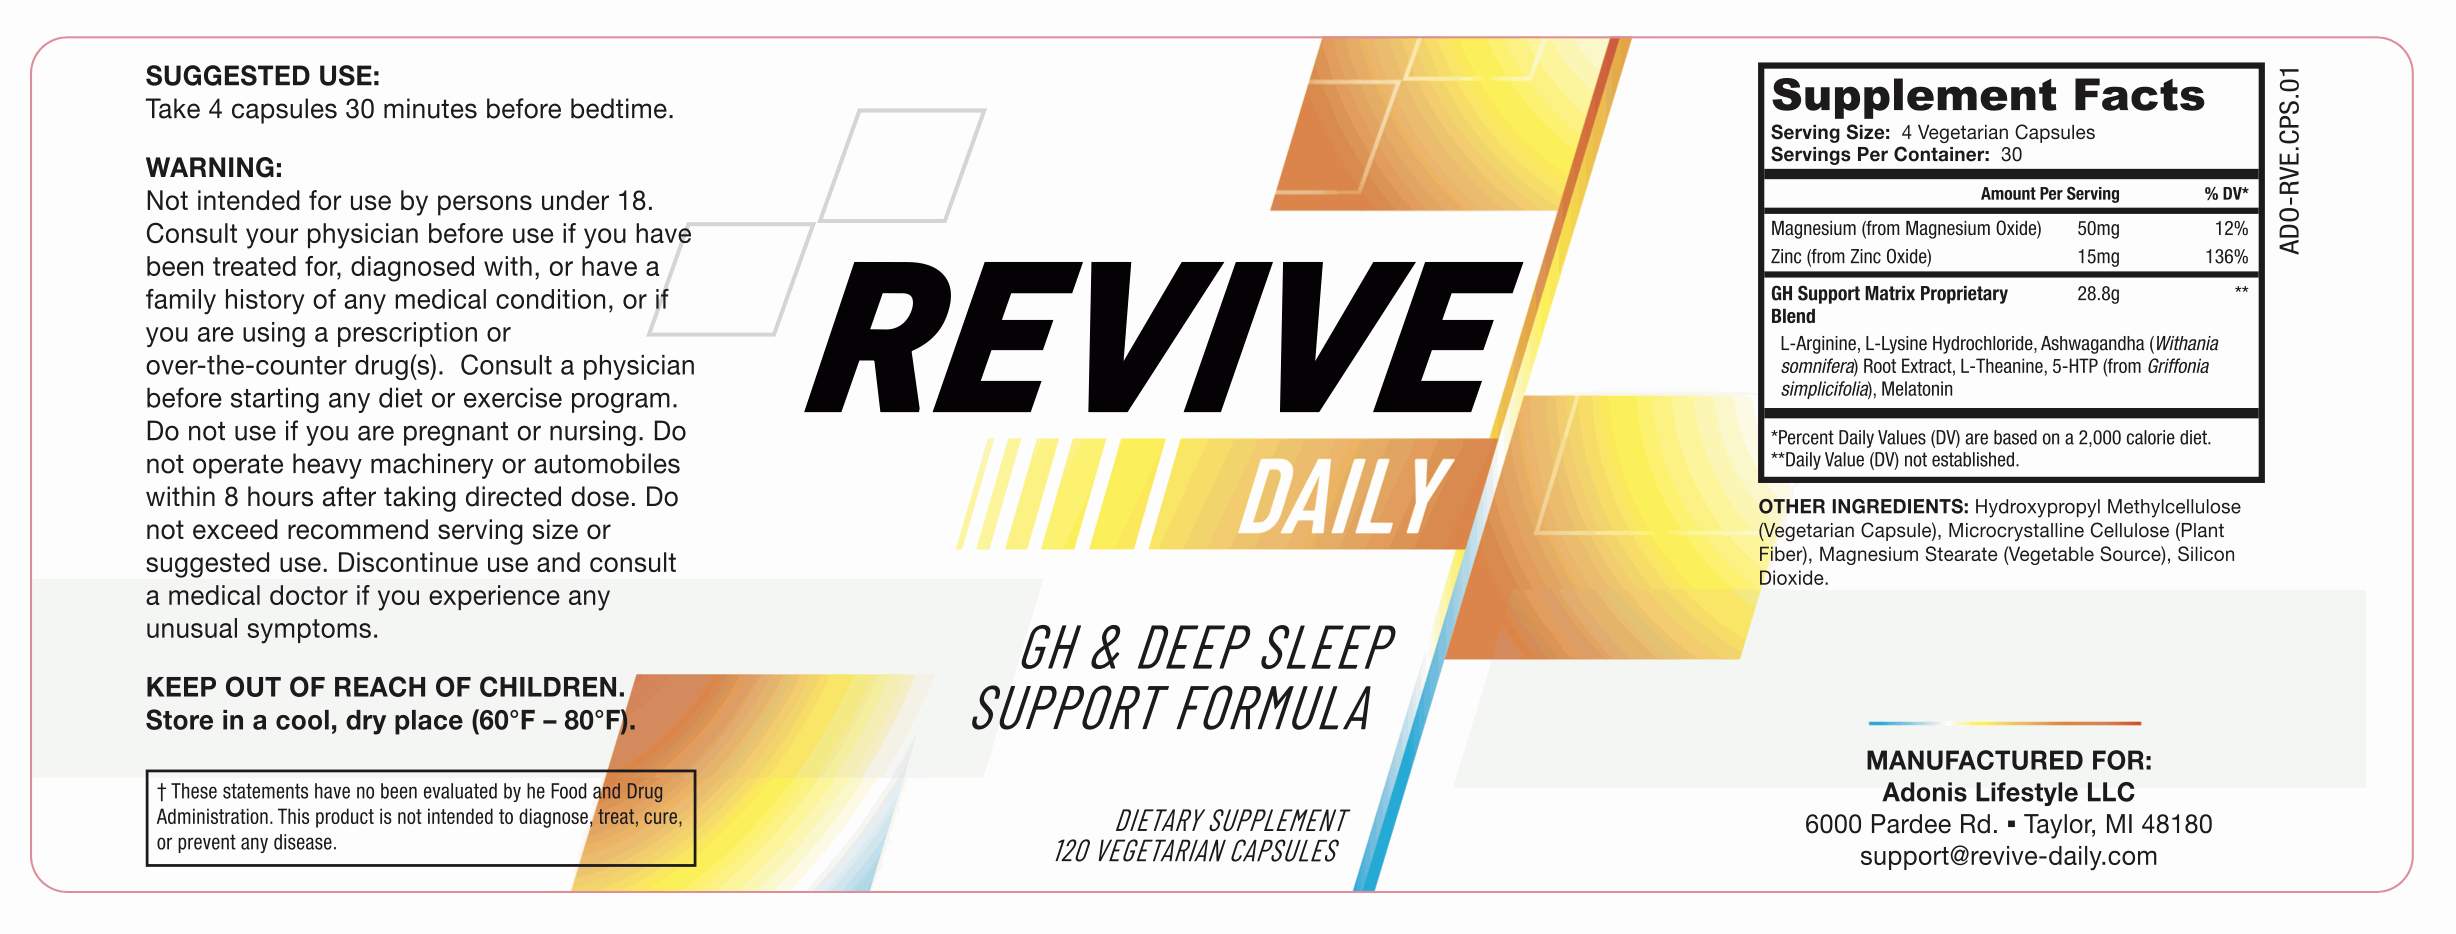 Revive Daily 1 Support Formula